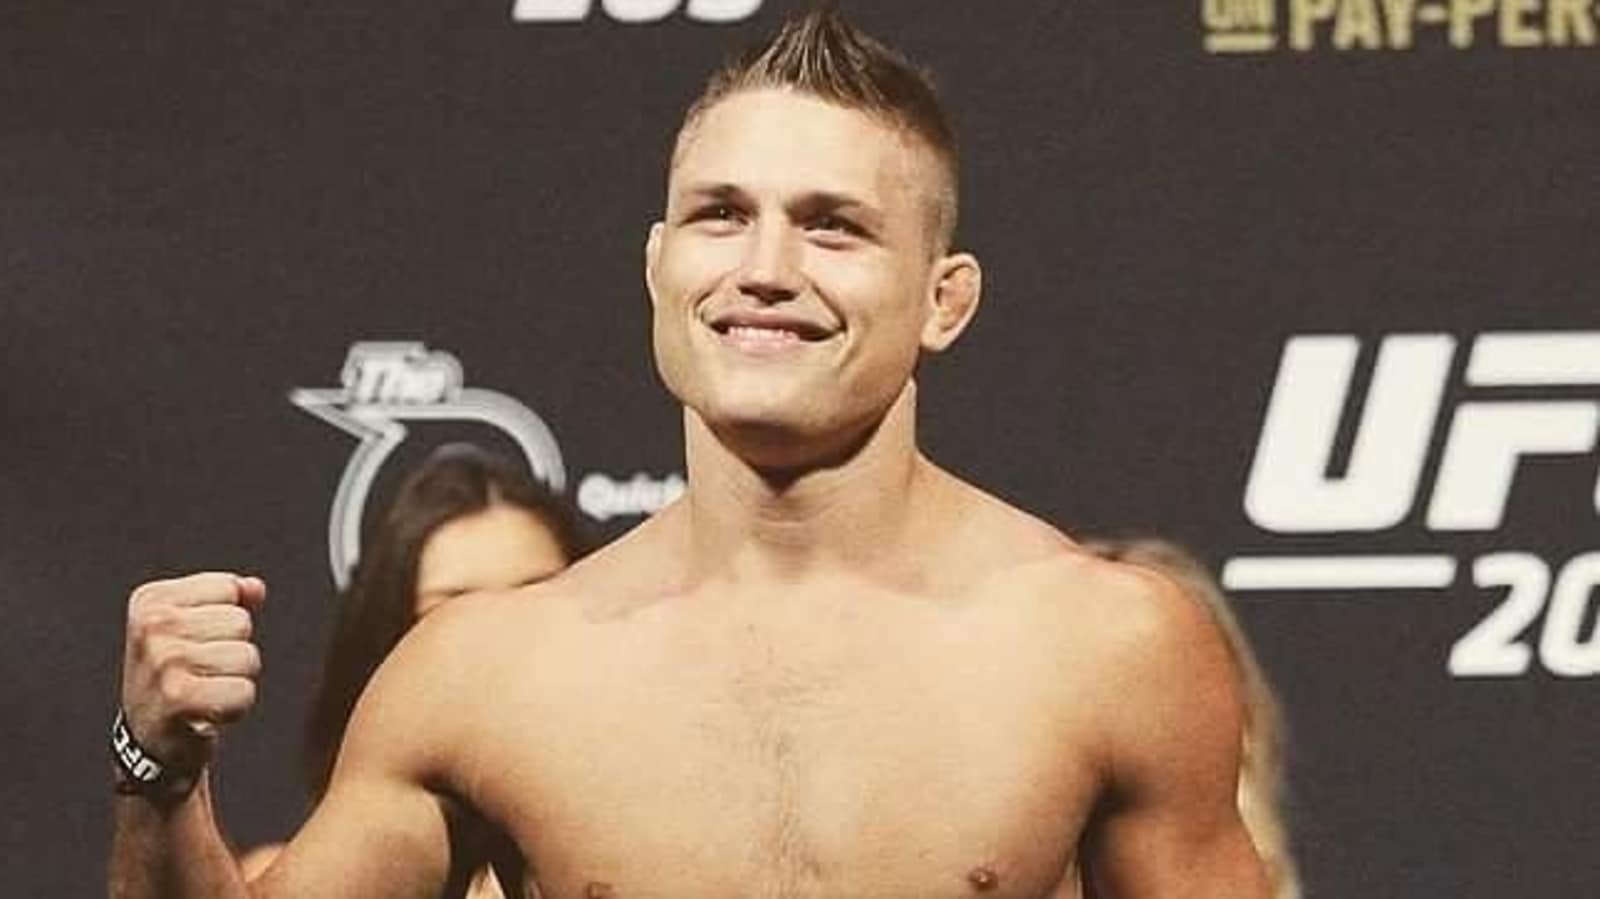 MMA star Drew Dober opens up on UFC ambitions and love for Indian food